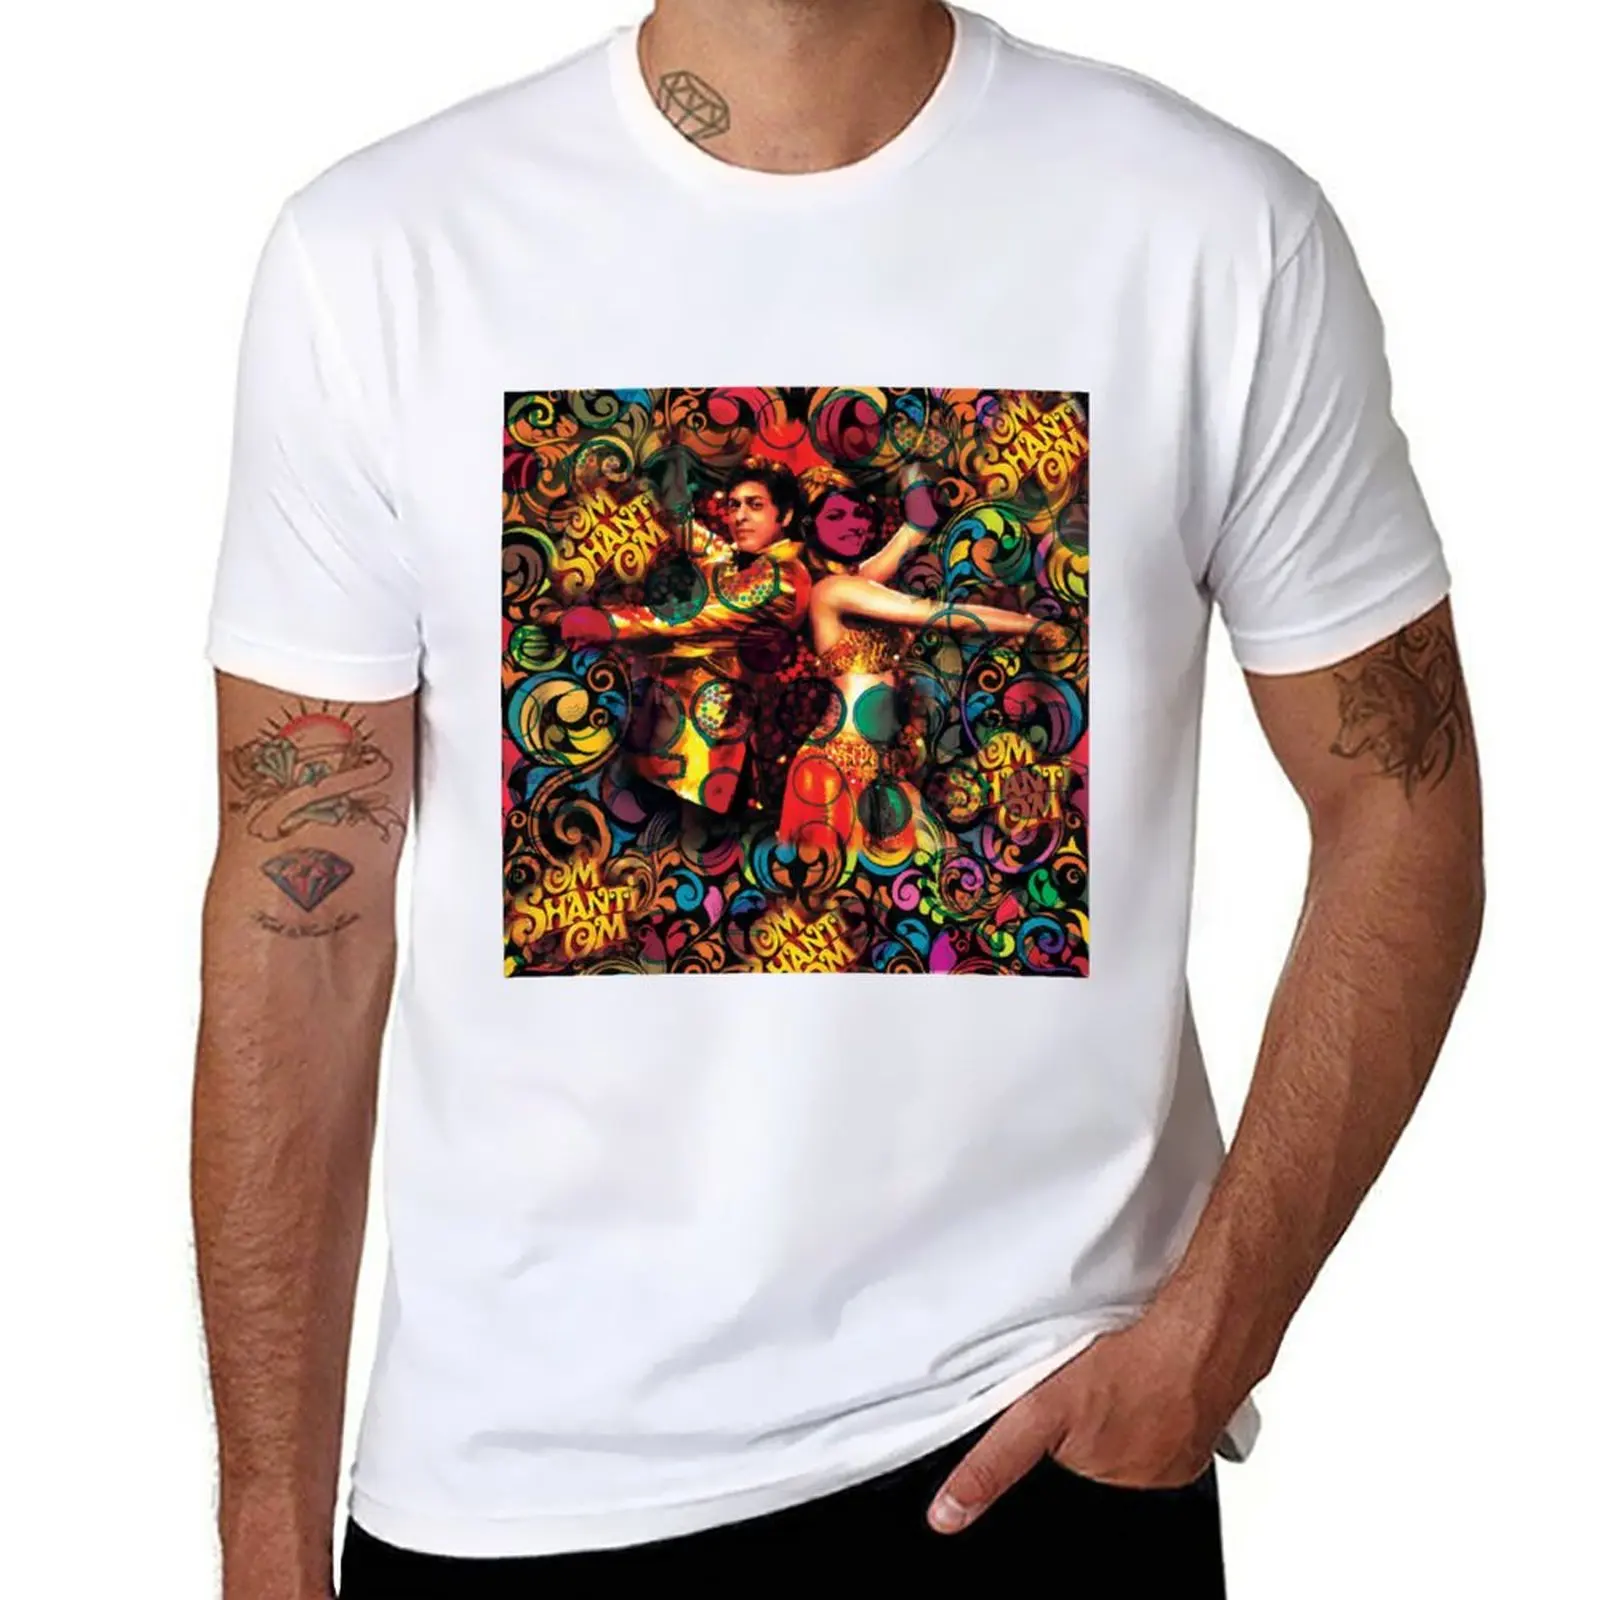 

BOLLYWOOD ART T-Shirt graphics customs design your own animal prinfor boys mens workout shirts